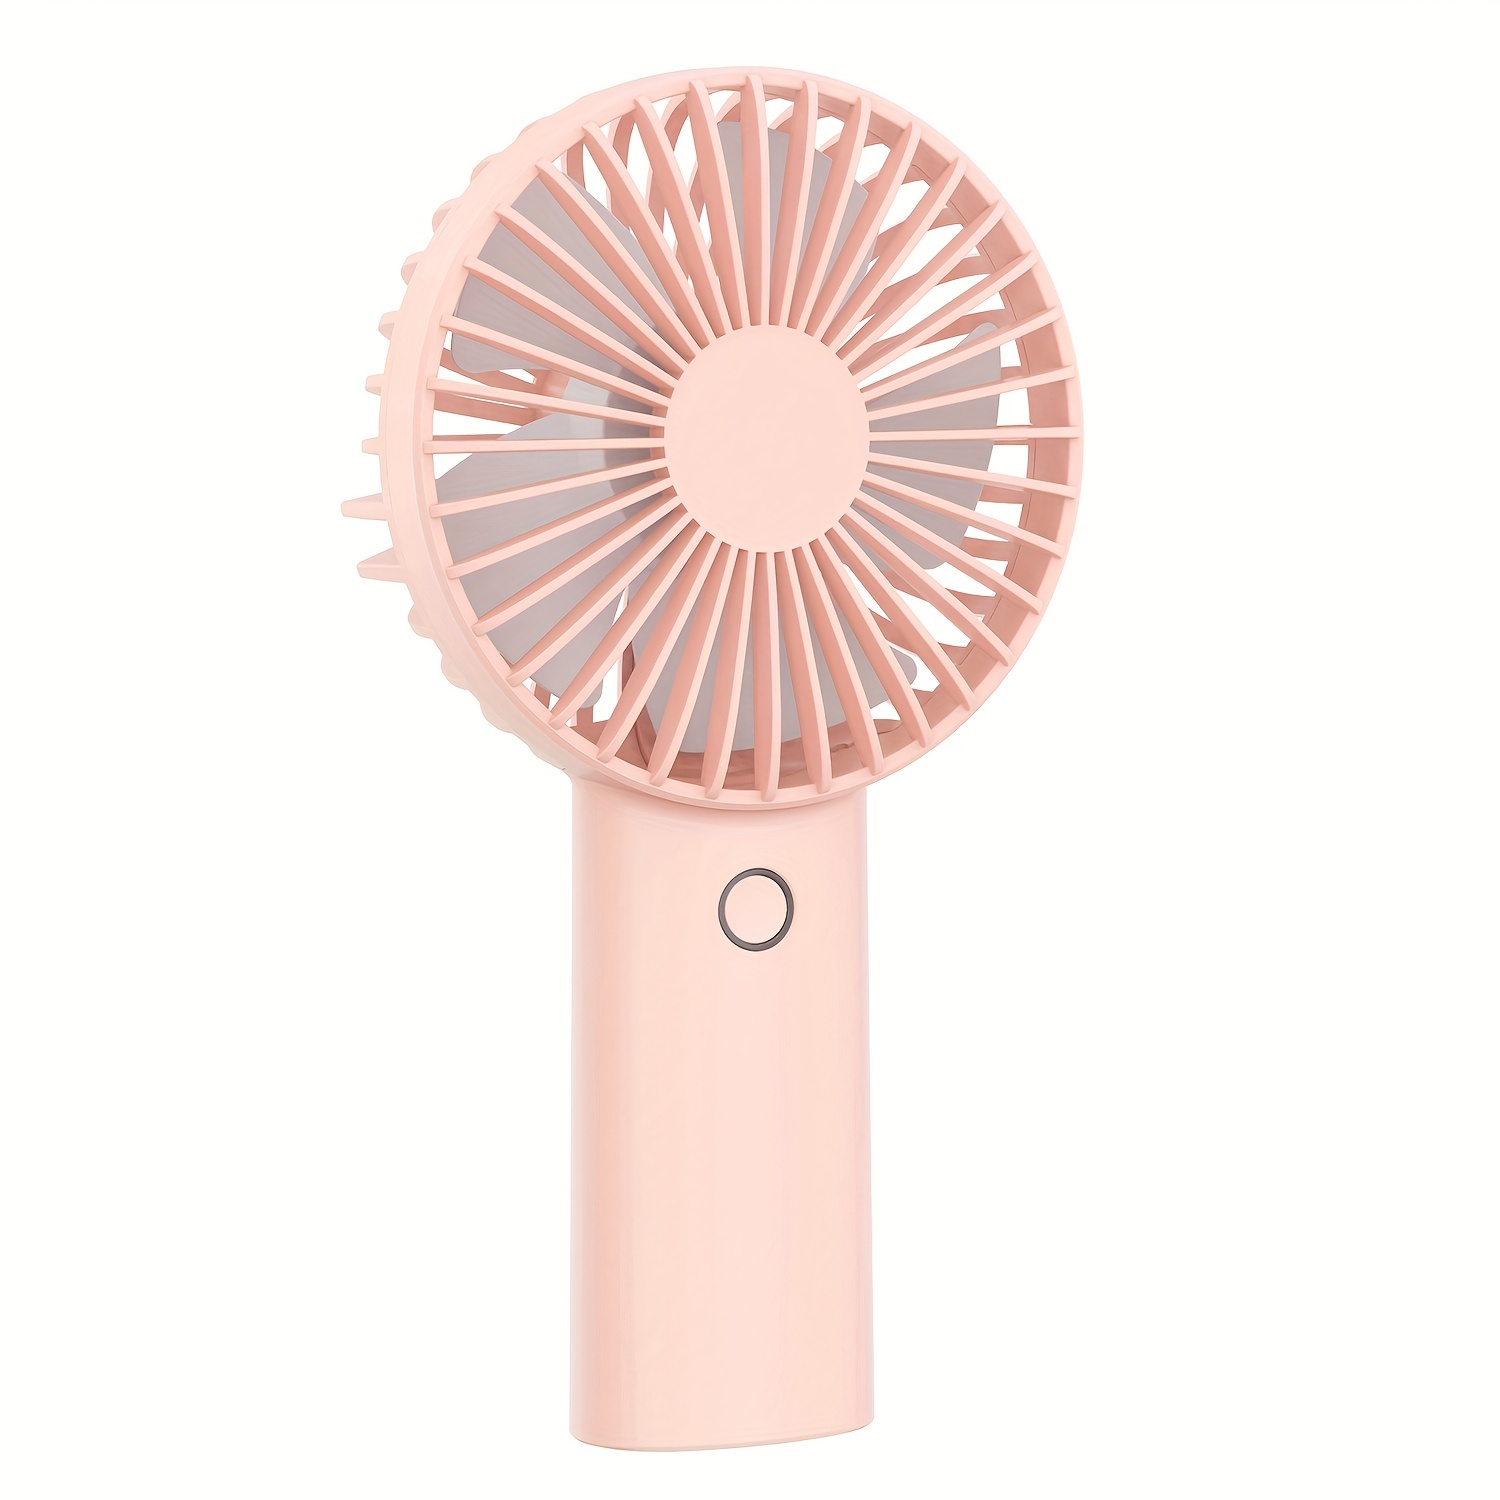 1pc portable handheld fan 4400mah battery operated rechargeable personal fan 6 15 hours working time for outdoor activities summer gift for men women details 0